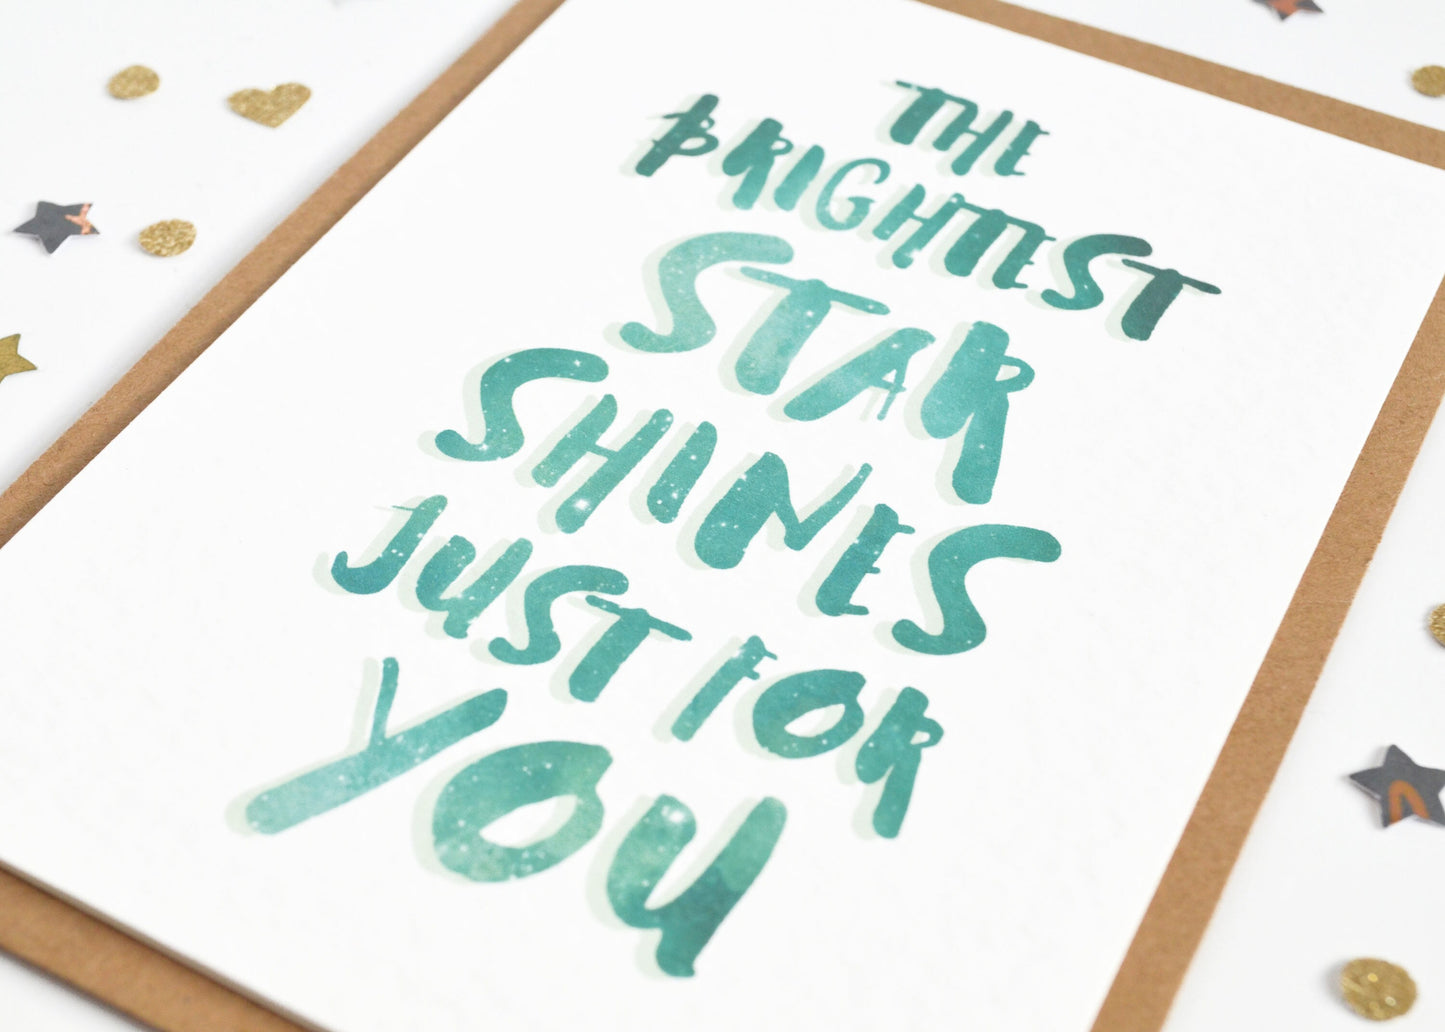 "The Brightest Star Shines Just For You" Celestial Positivity Card